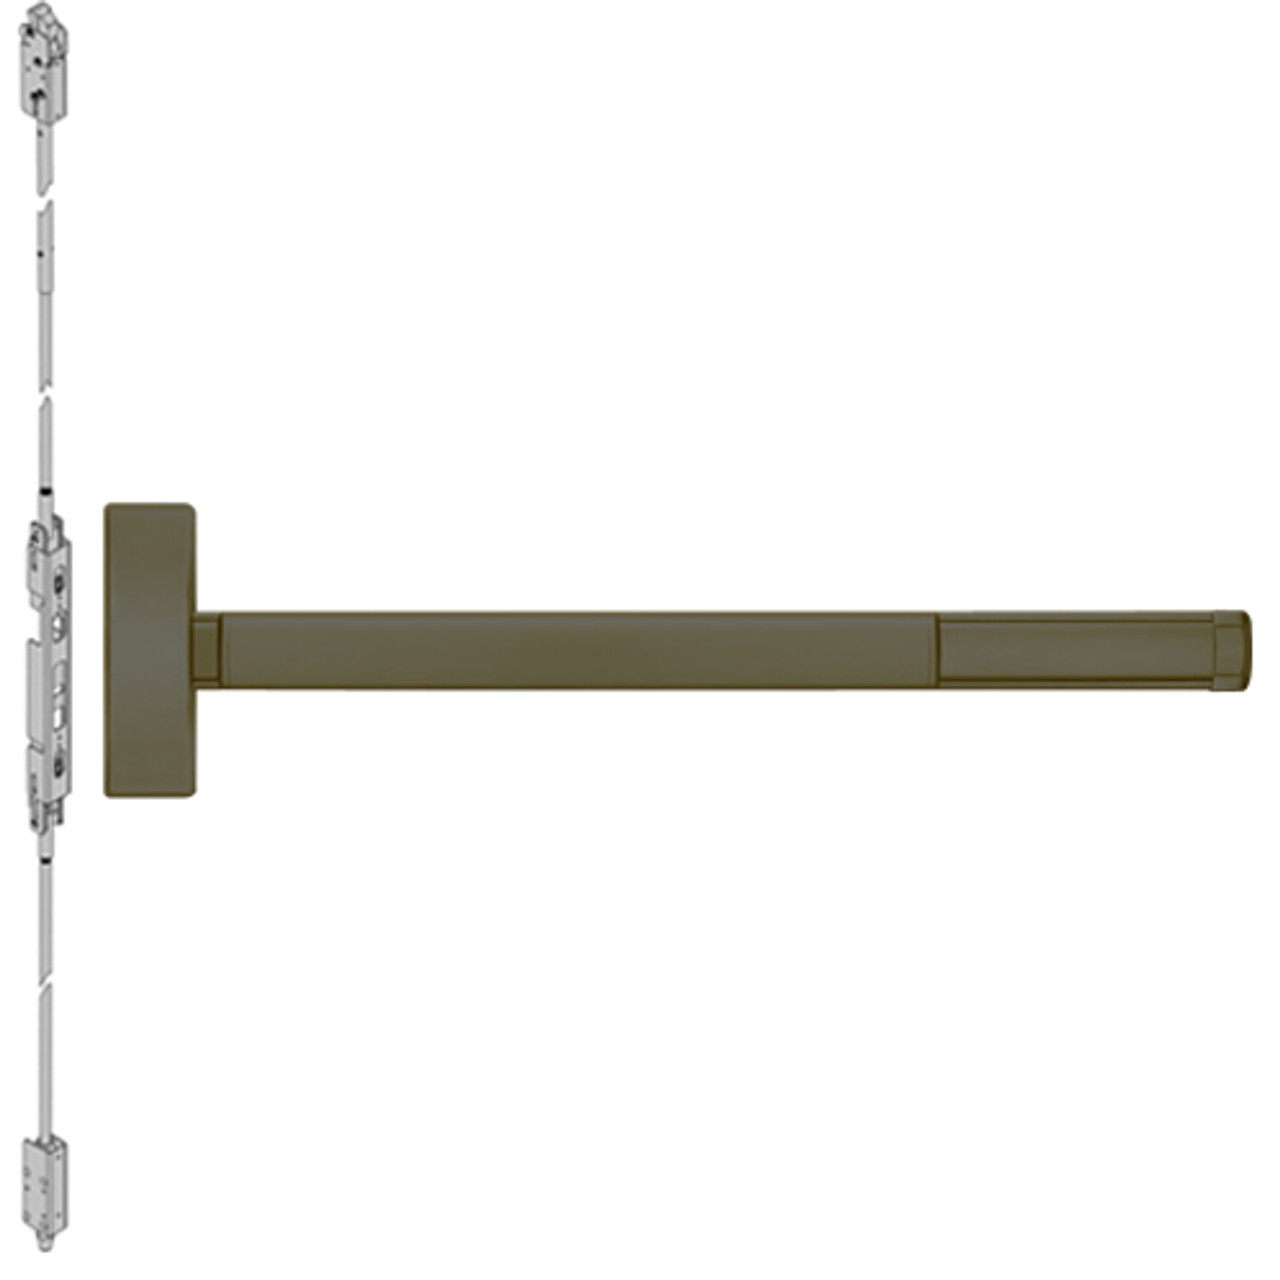 FL2815-613-48 PHI 2800 Series Fire Rated Concealed Vertical Rod Exit Device Prepped for Thumbpiece Always Active in Oil Rubbed Bronze Finish